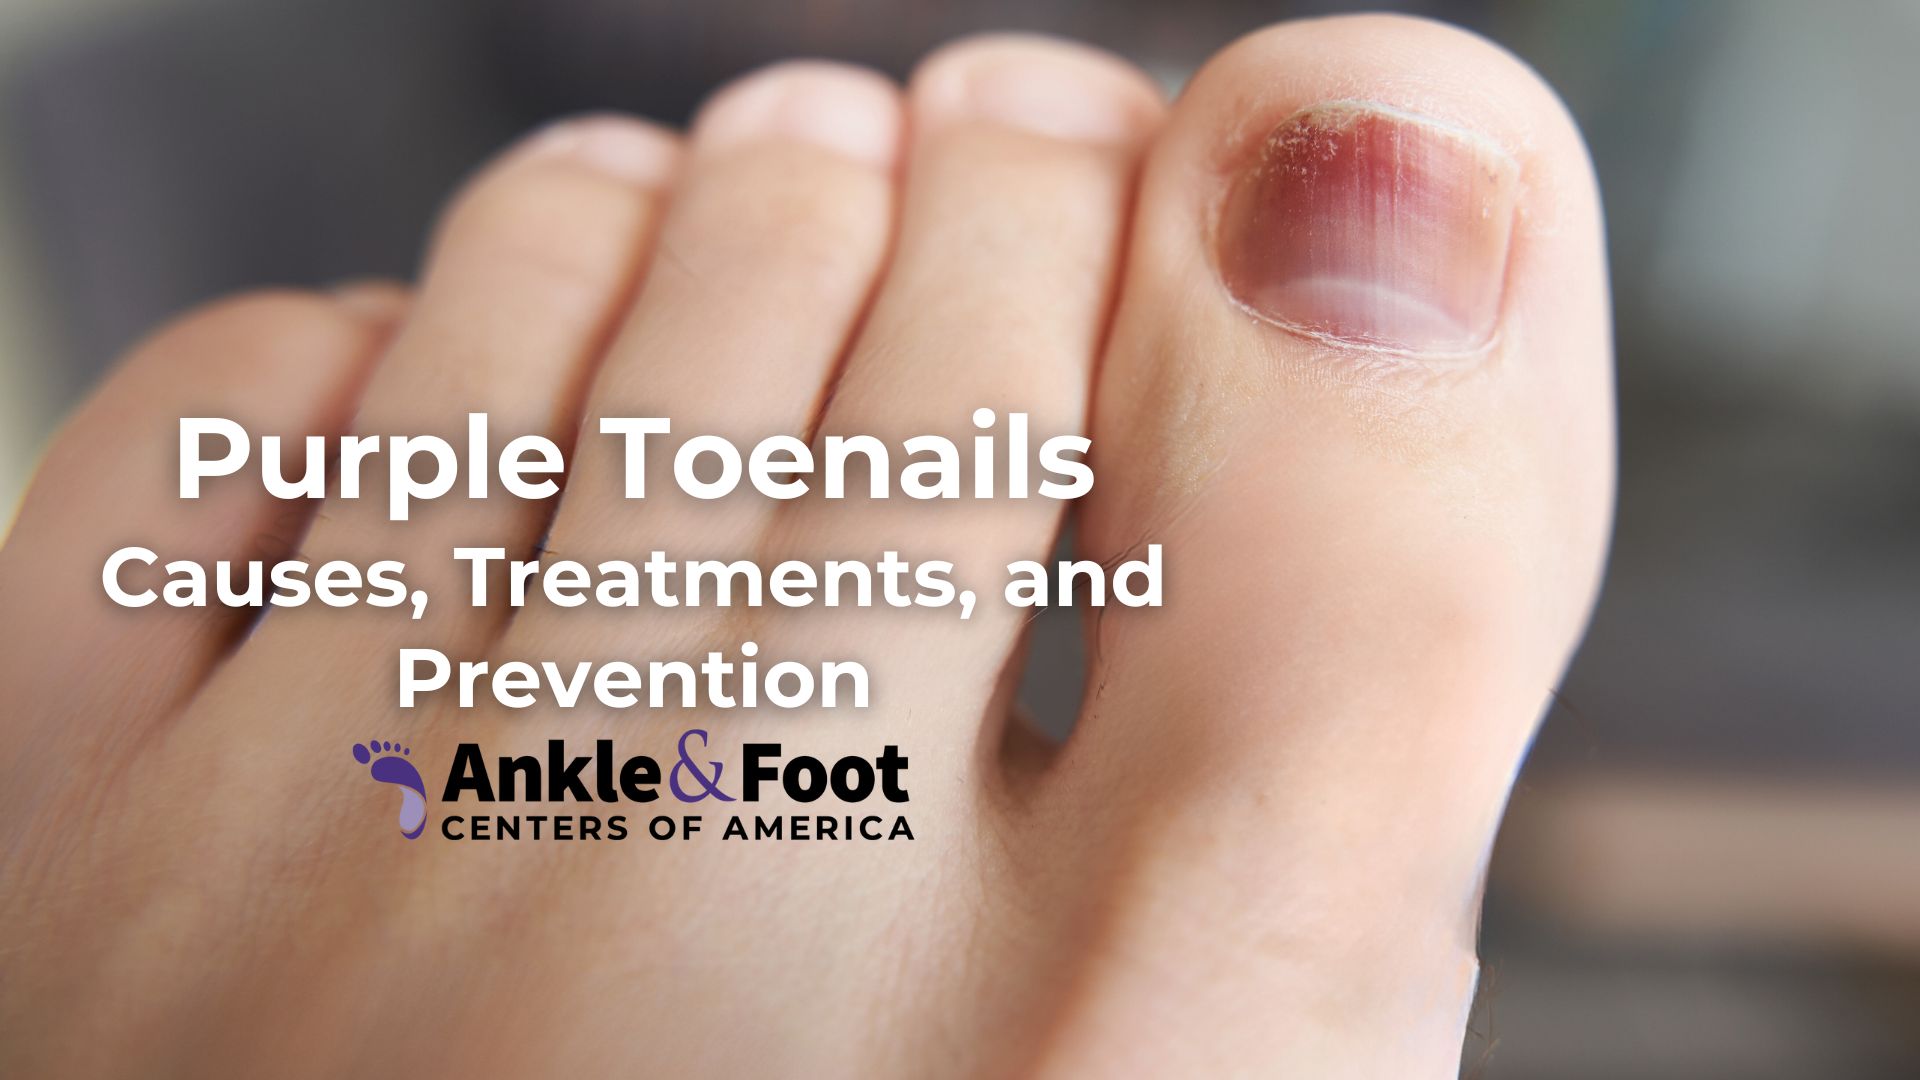 Blue toe syndrome: Causes, treatment, outlook, and prevention